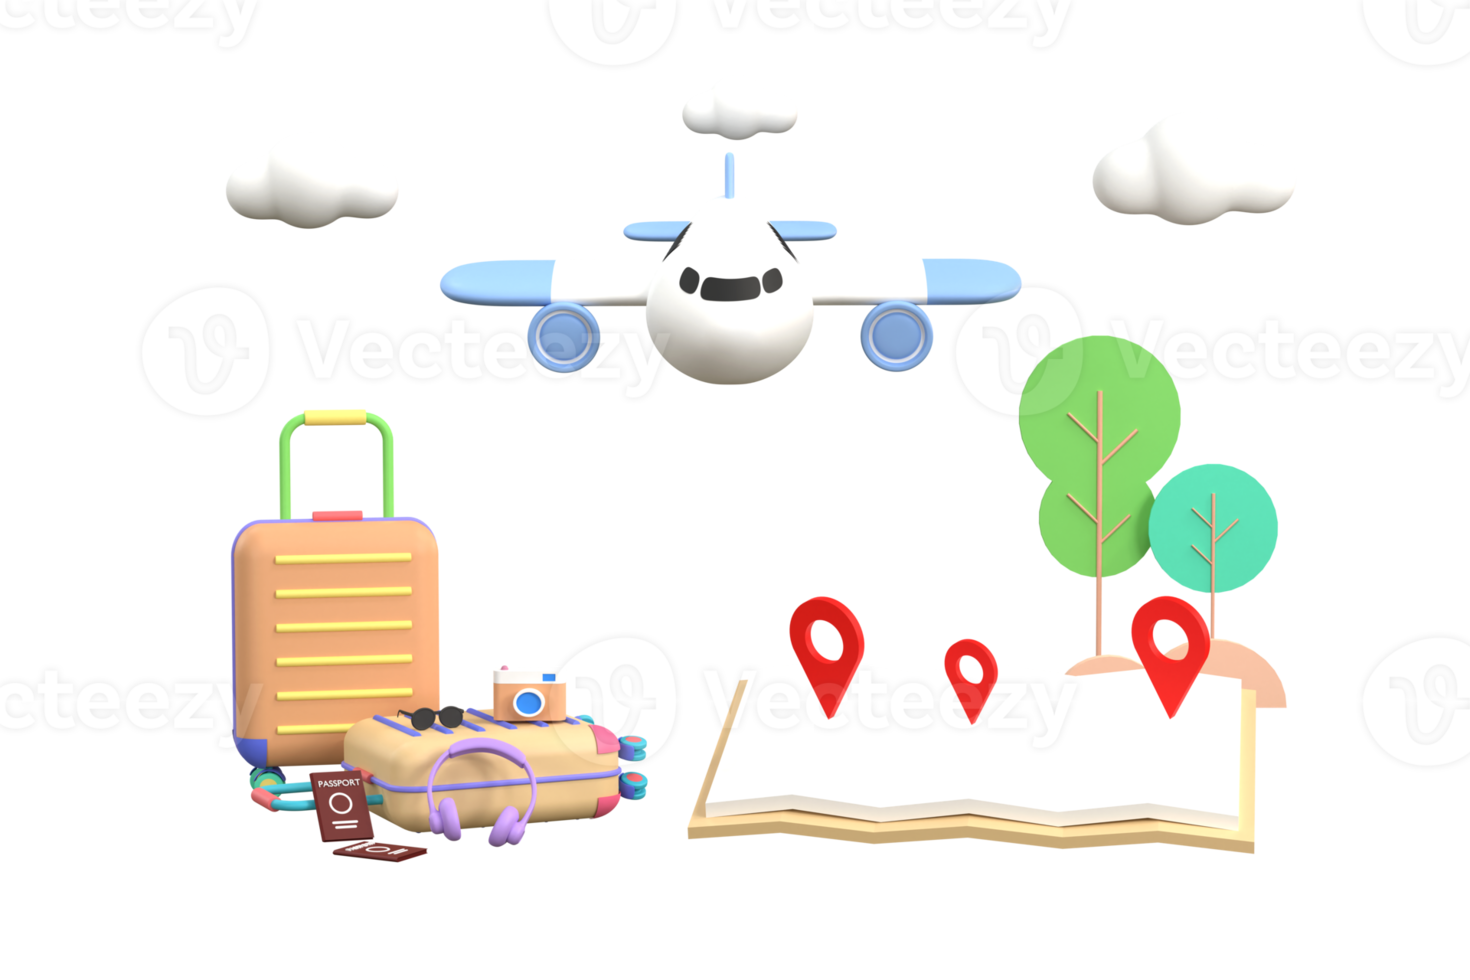 3D. airplane travel tourism plane trip planning world tour luggage with pin location suitcase and map png